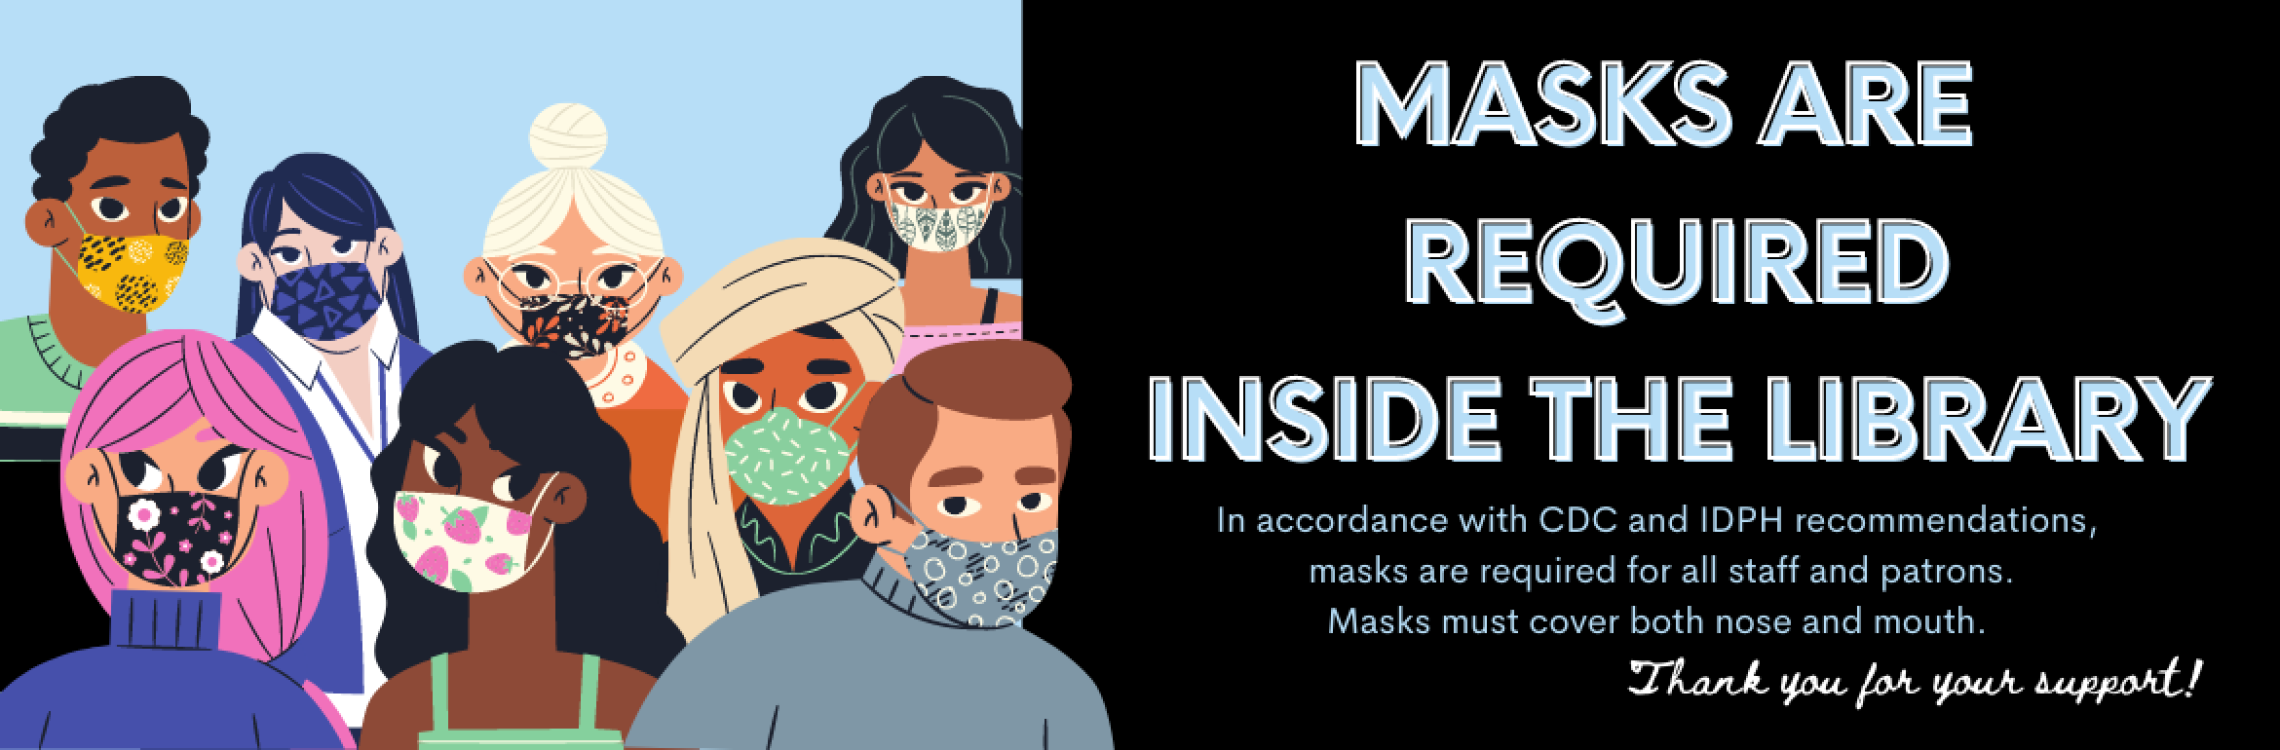 Masks are required inside the library